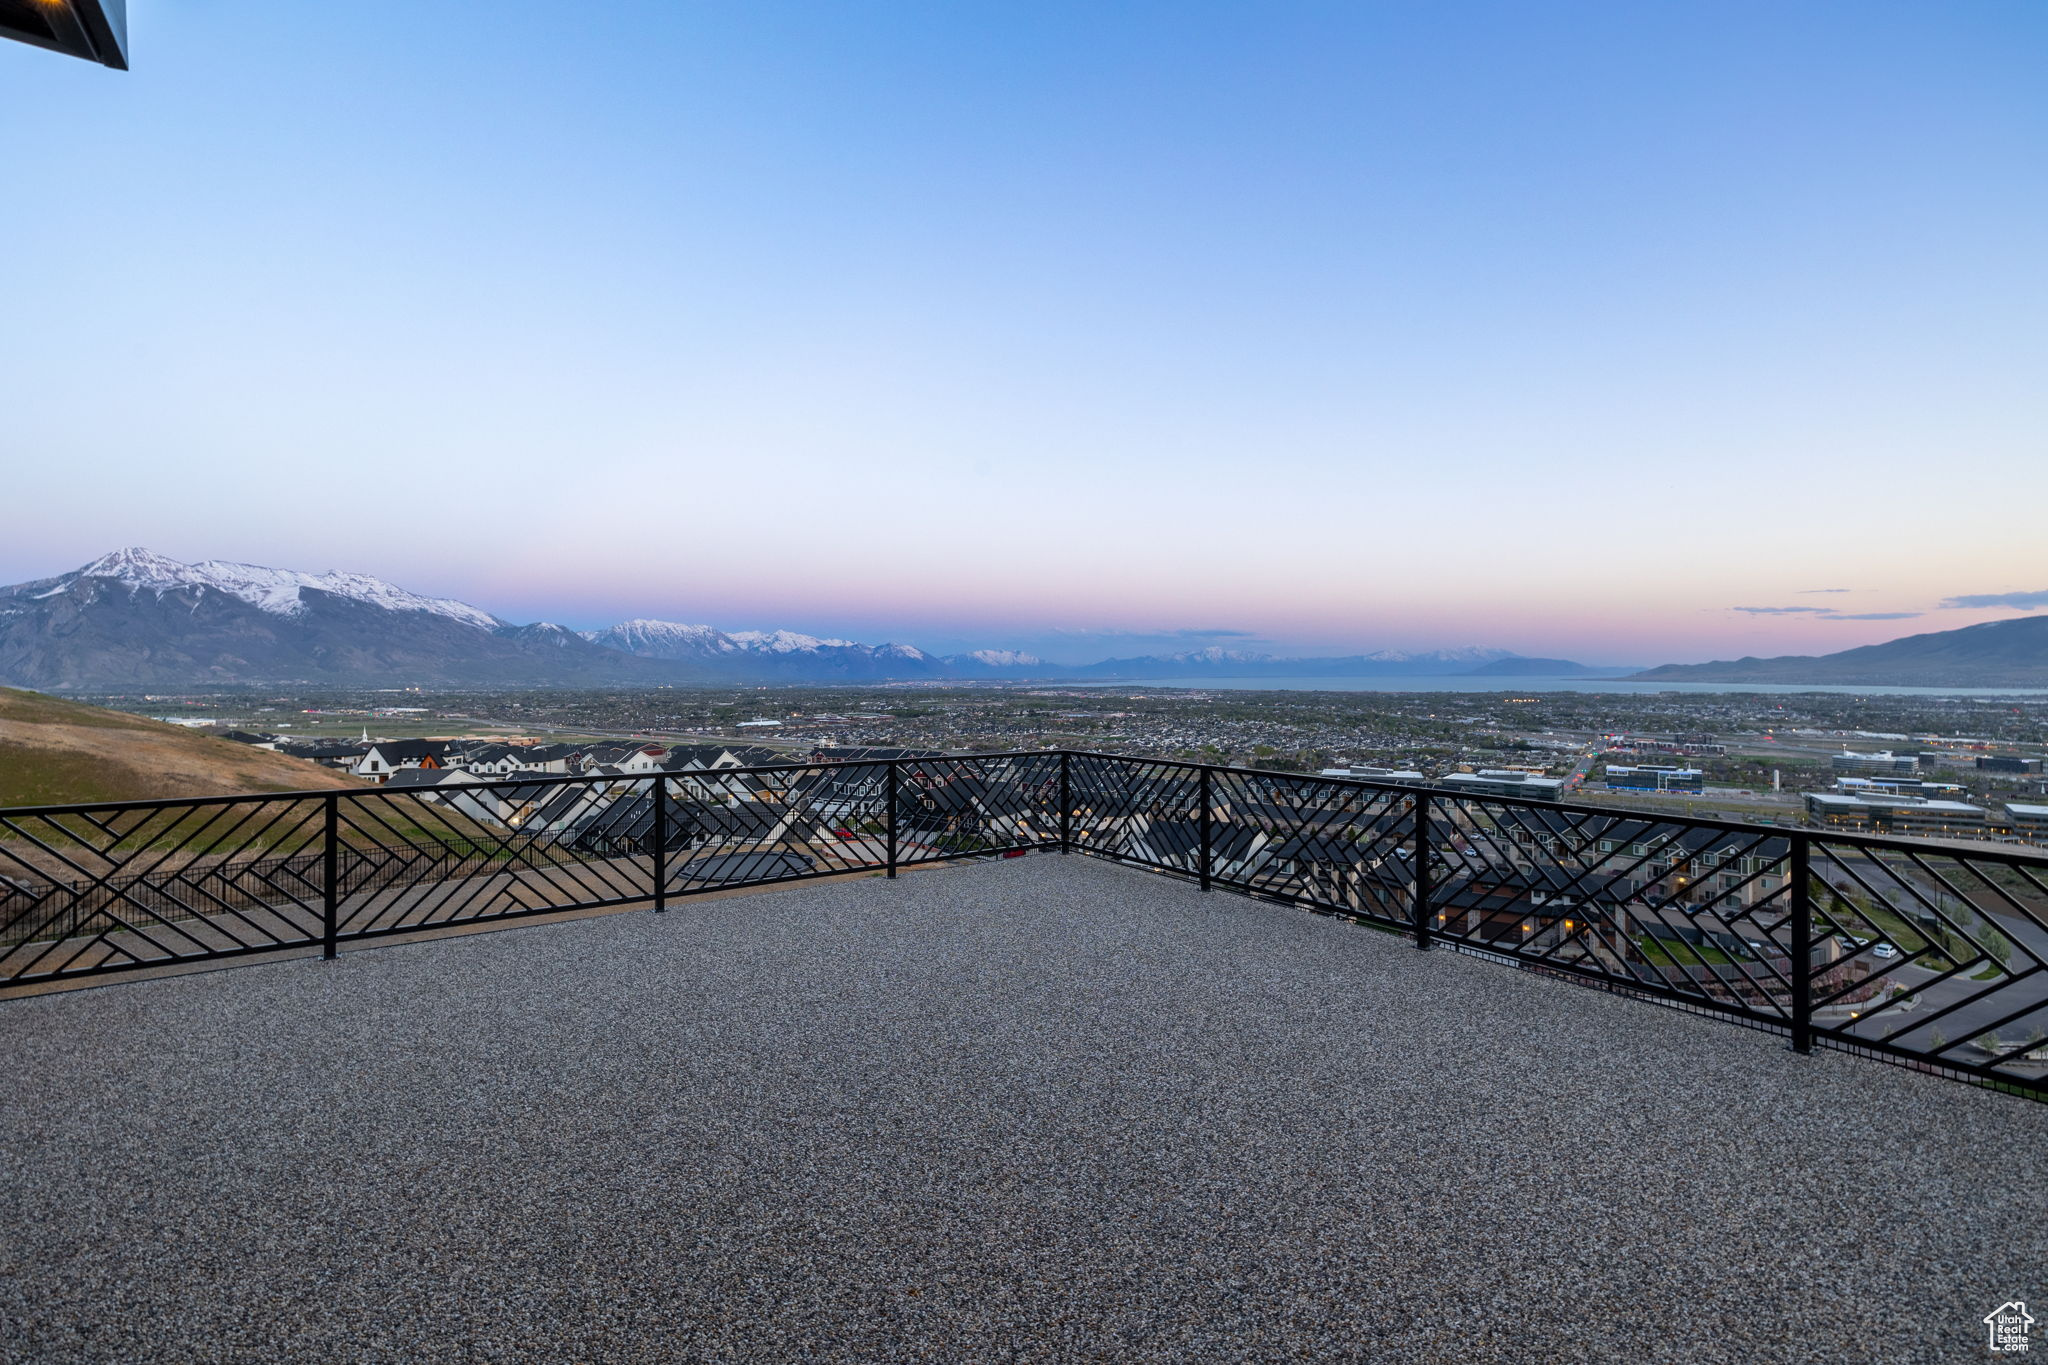 Patio terrace at dusk with a mountain view